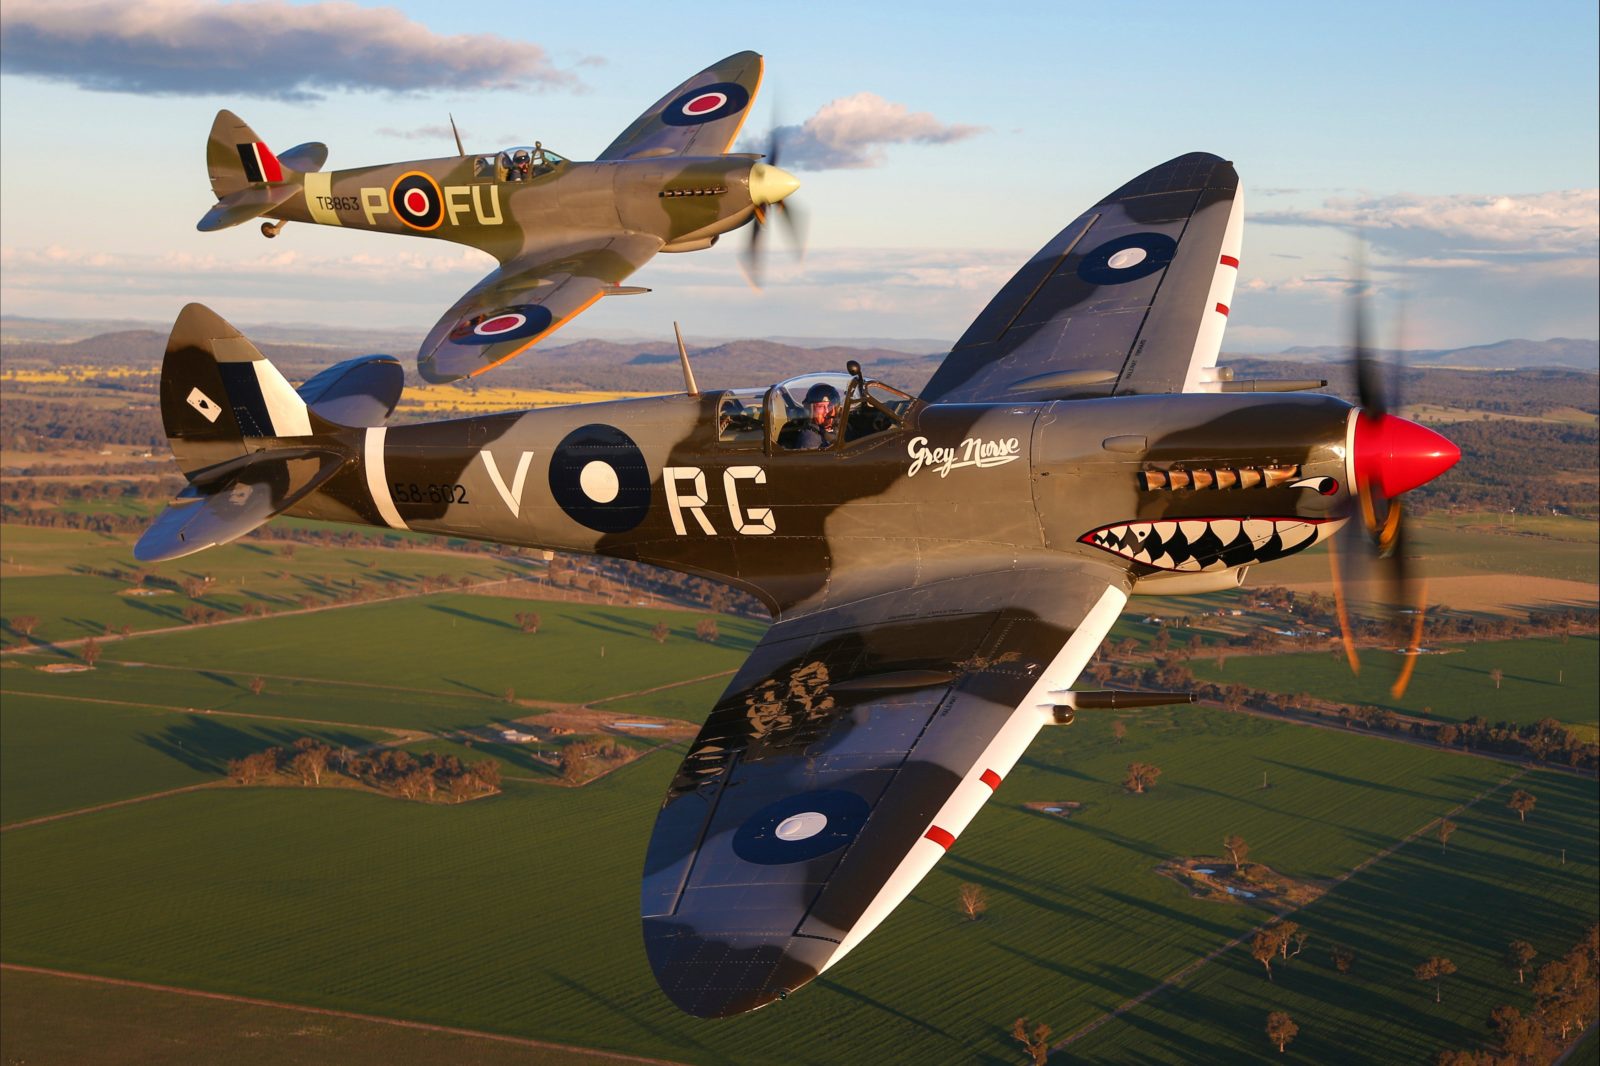 The Temora Aviation Museum's MK VIII Spitfire (front) and MK XVI Spitfire (back) flying in formation